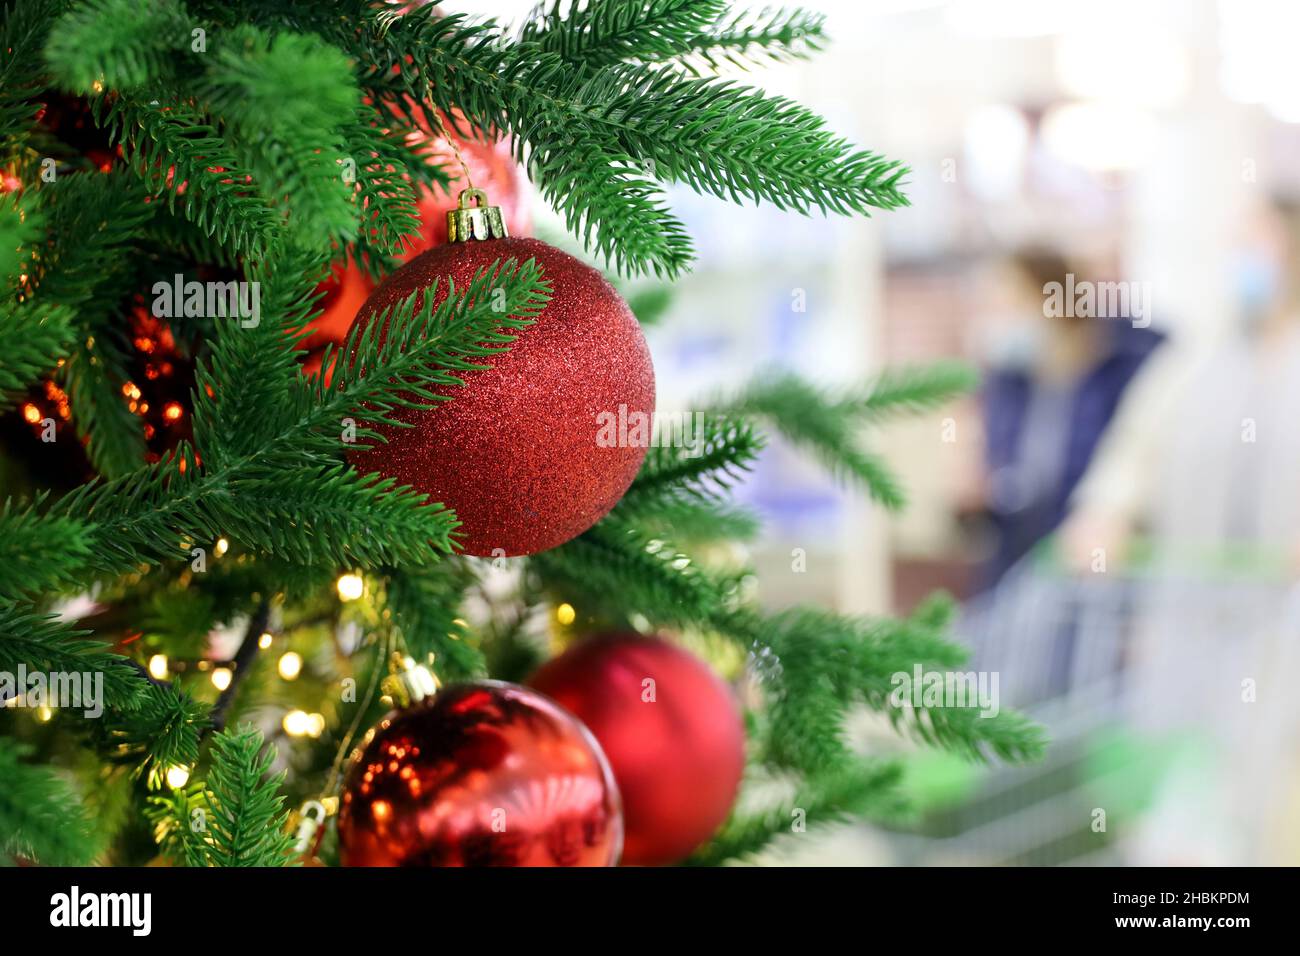 Christmas tree with red toy balls in a shopping mall on background of walking people in masks. New Year decorations, winter holidays Stock Photo